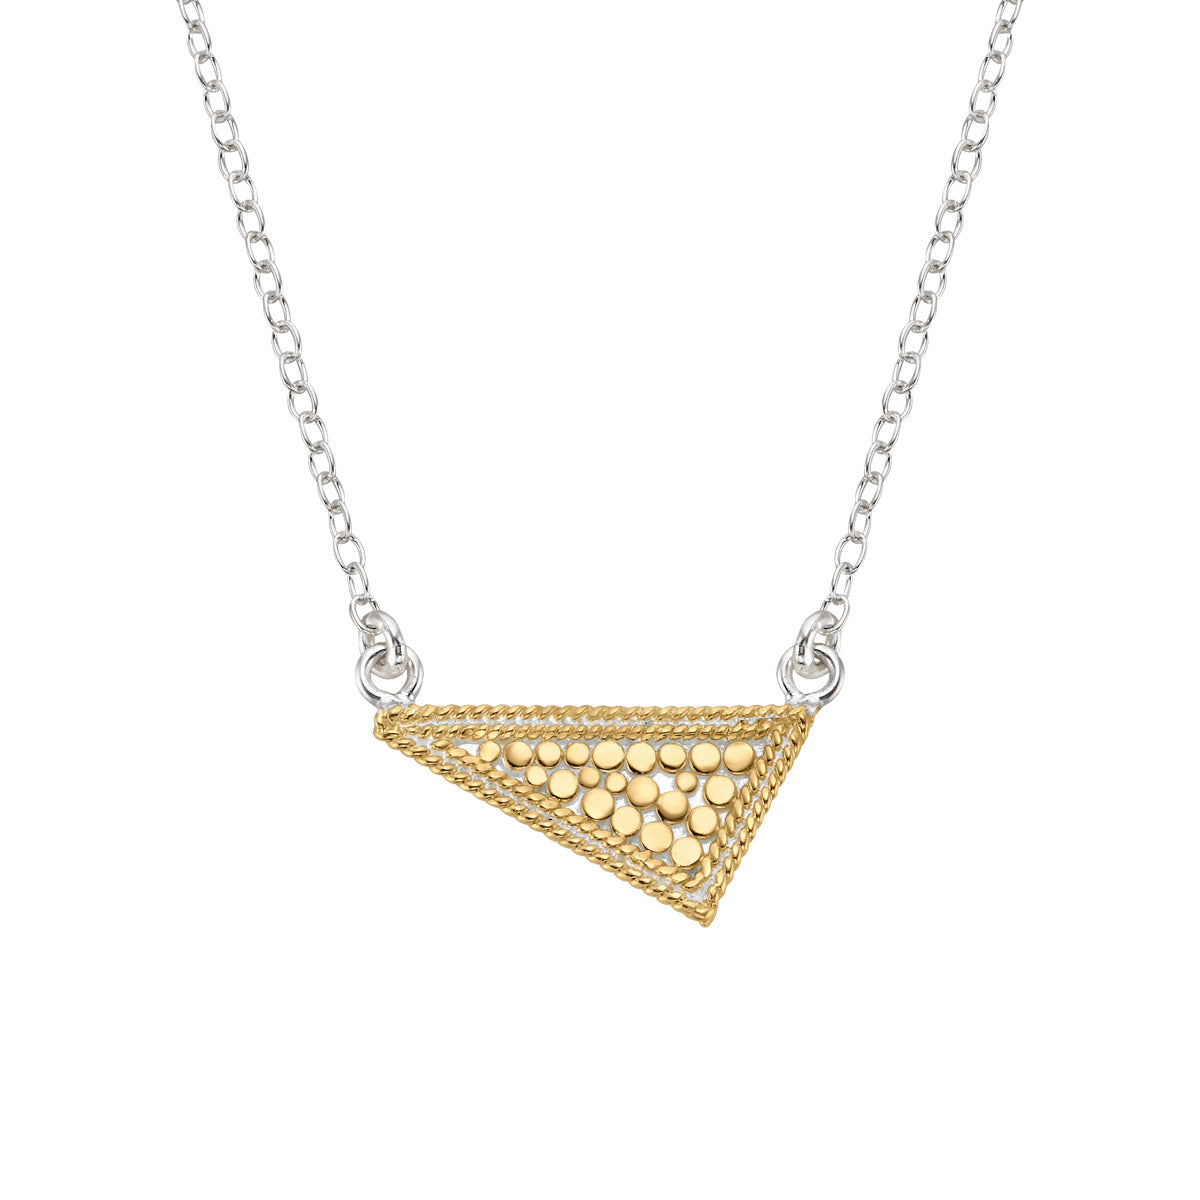 Ana Beck 18k gold plated and sterling silver Reversible Triangle Necklace